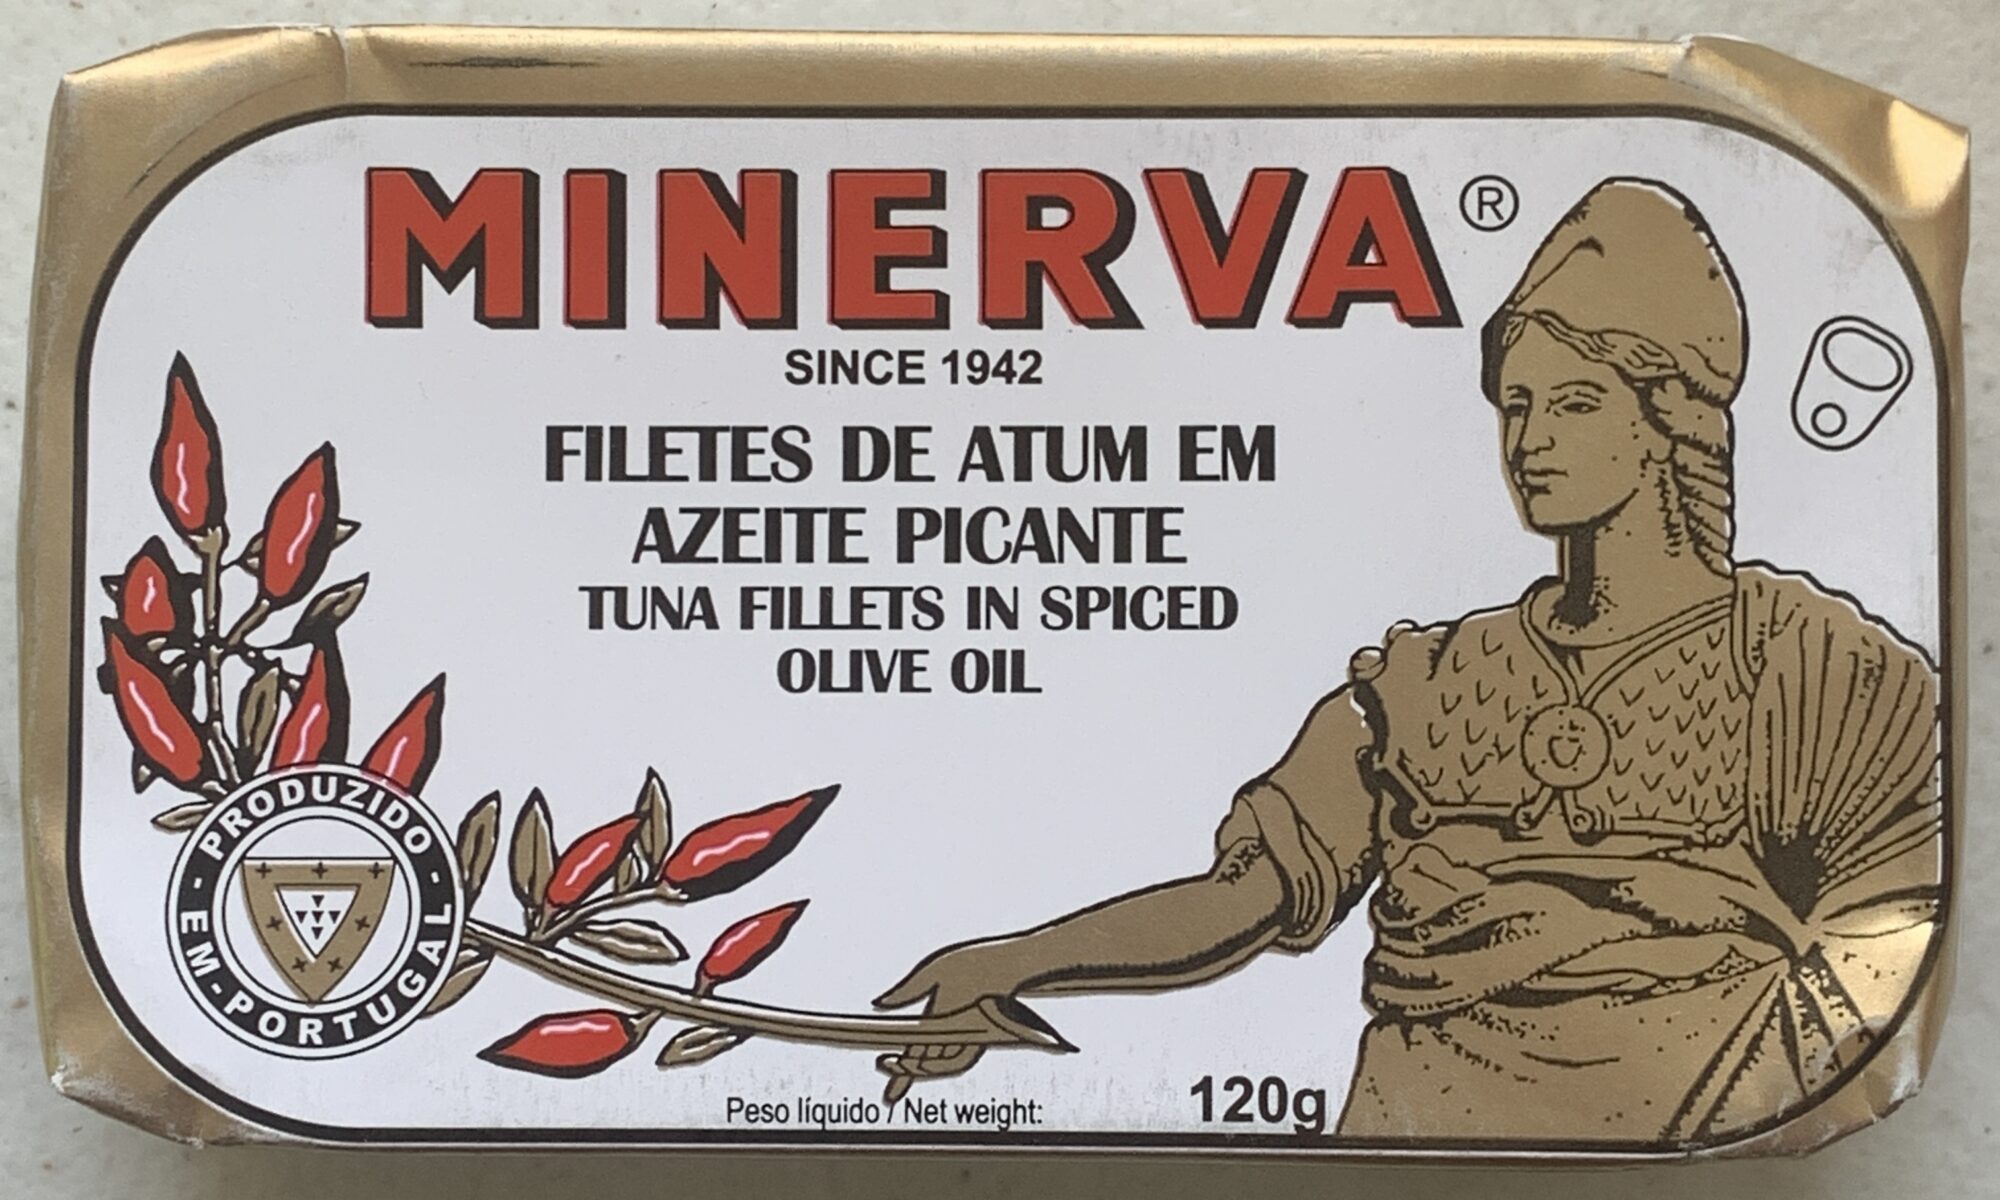 Image of the front of a package of Minerva Skipjack Tuna Fillets in Spiced Olive Oil